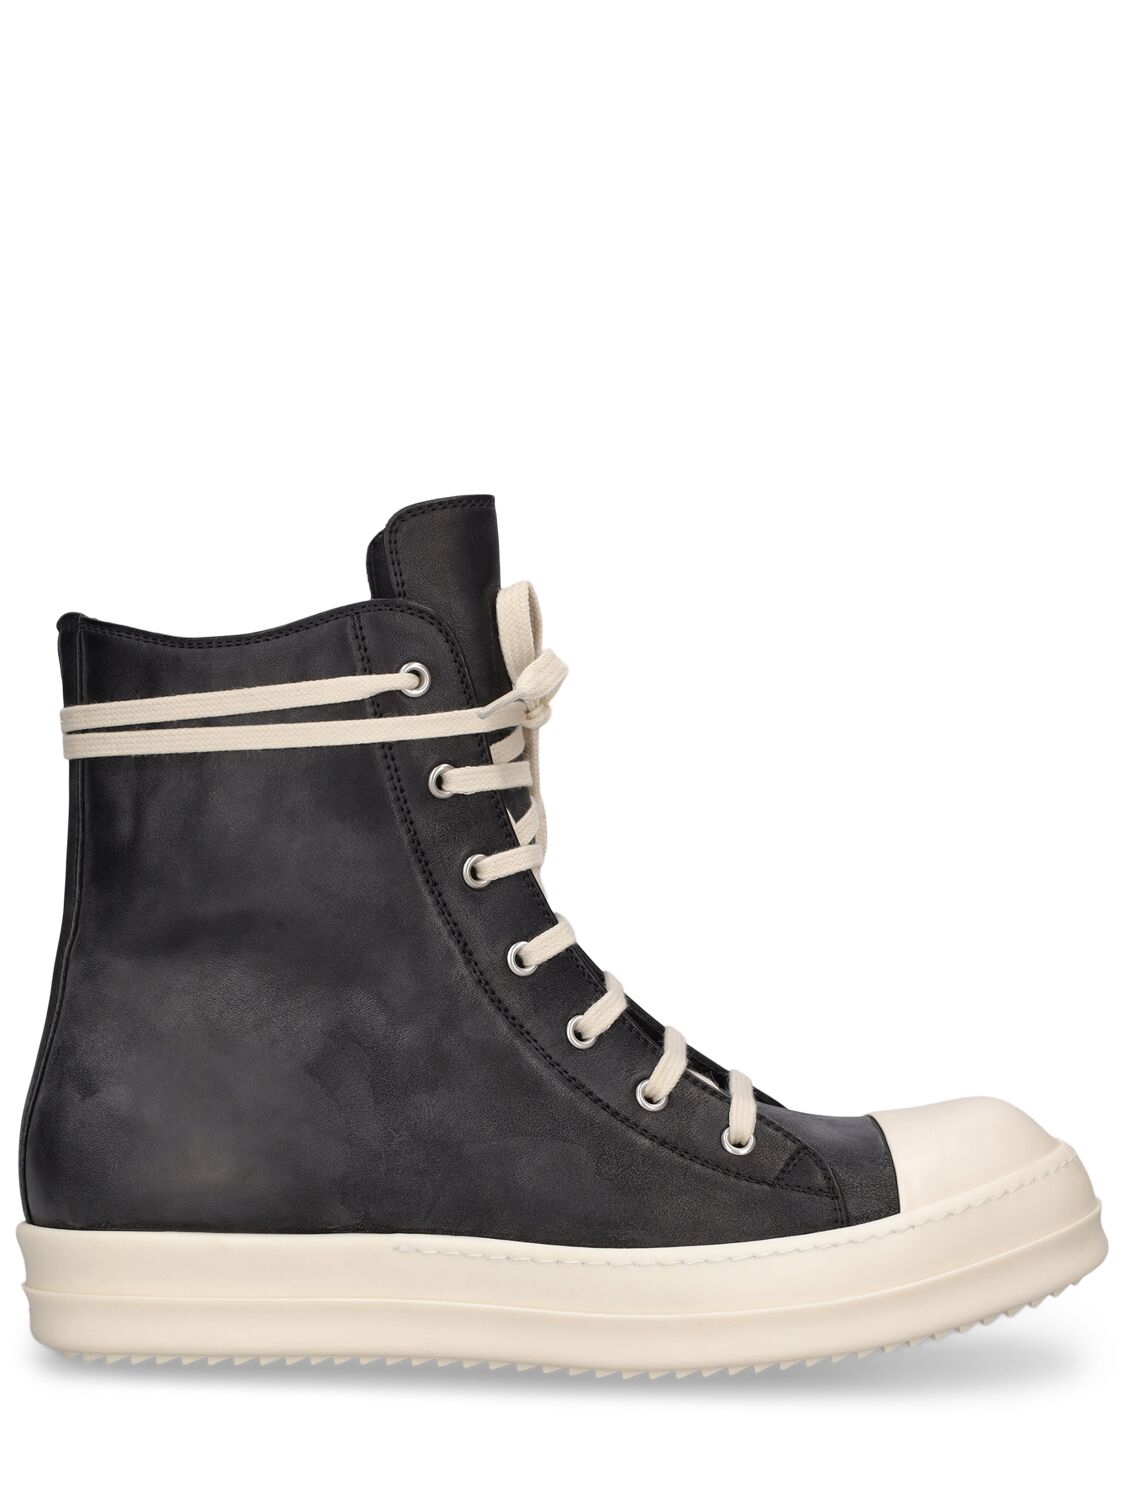 Image of Leather High Top Sneakers